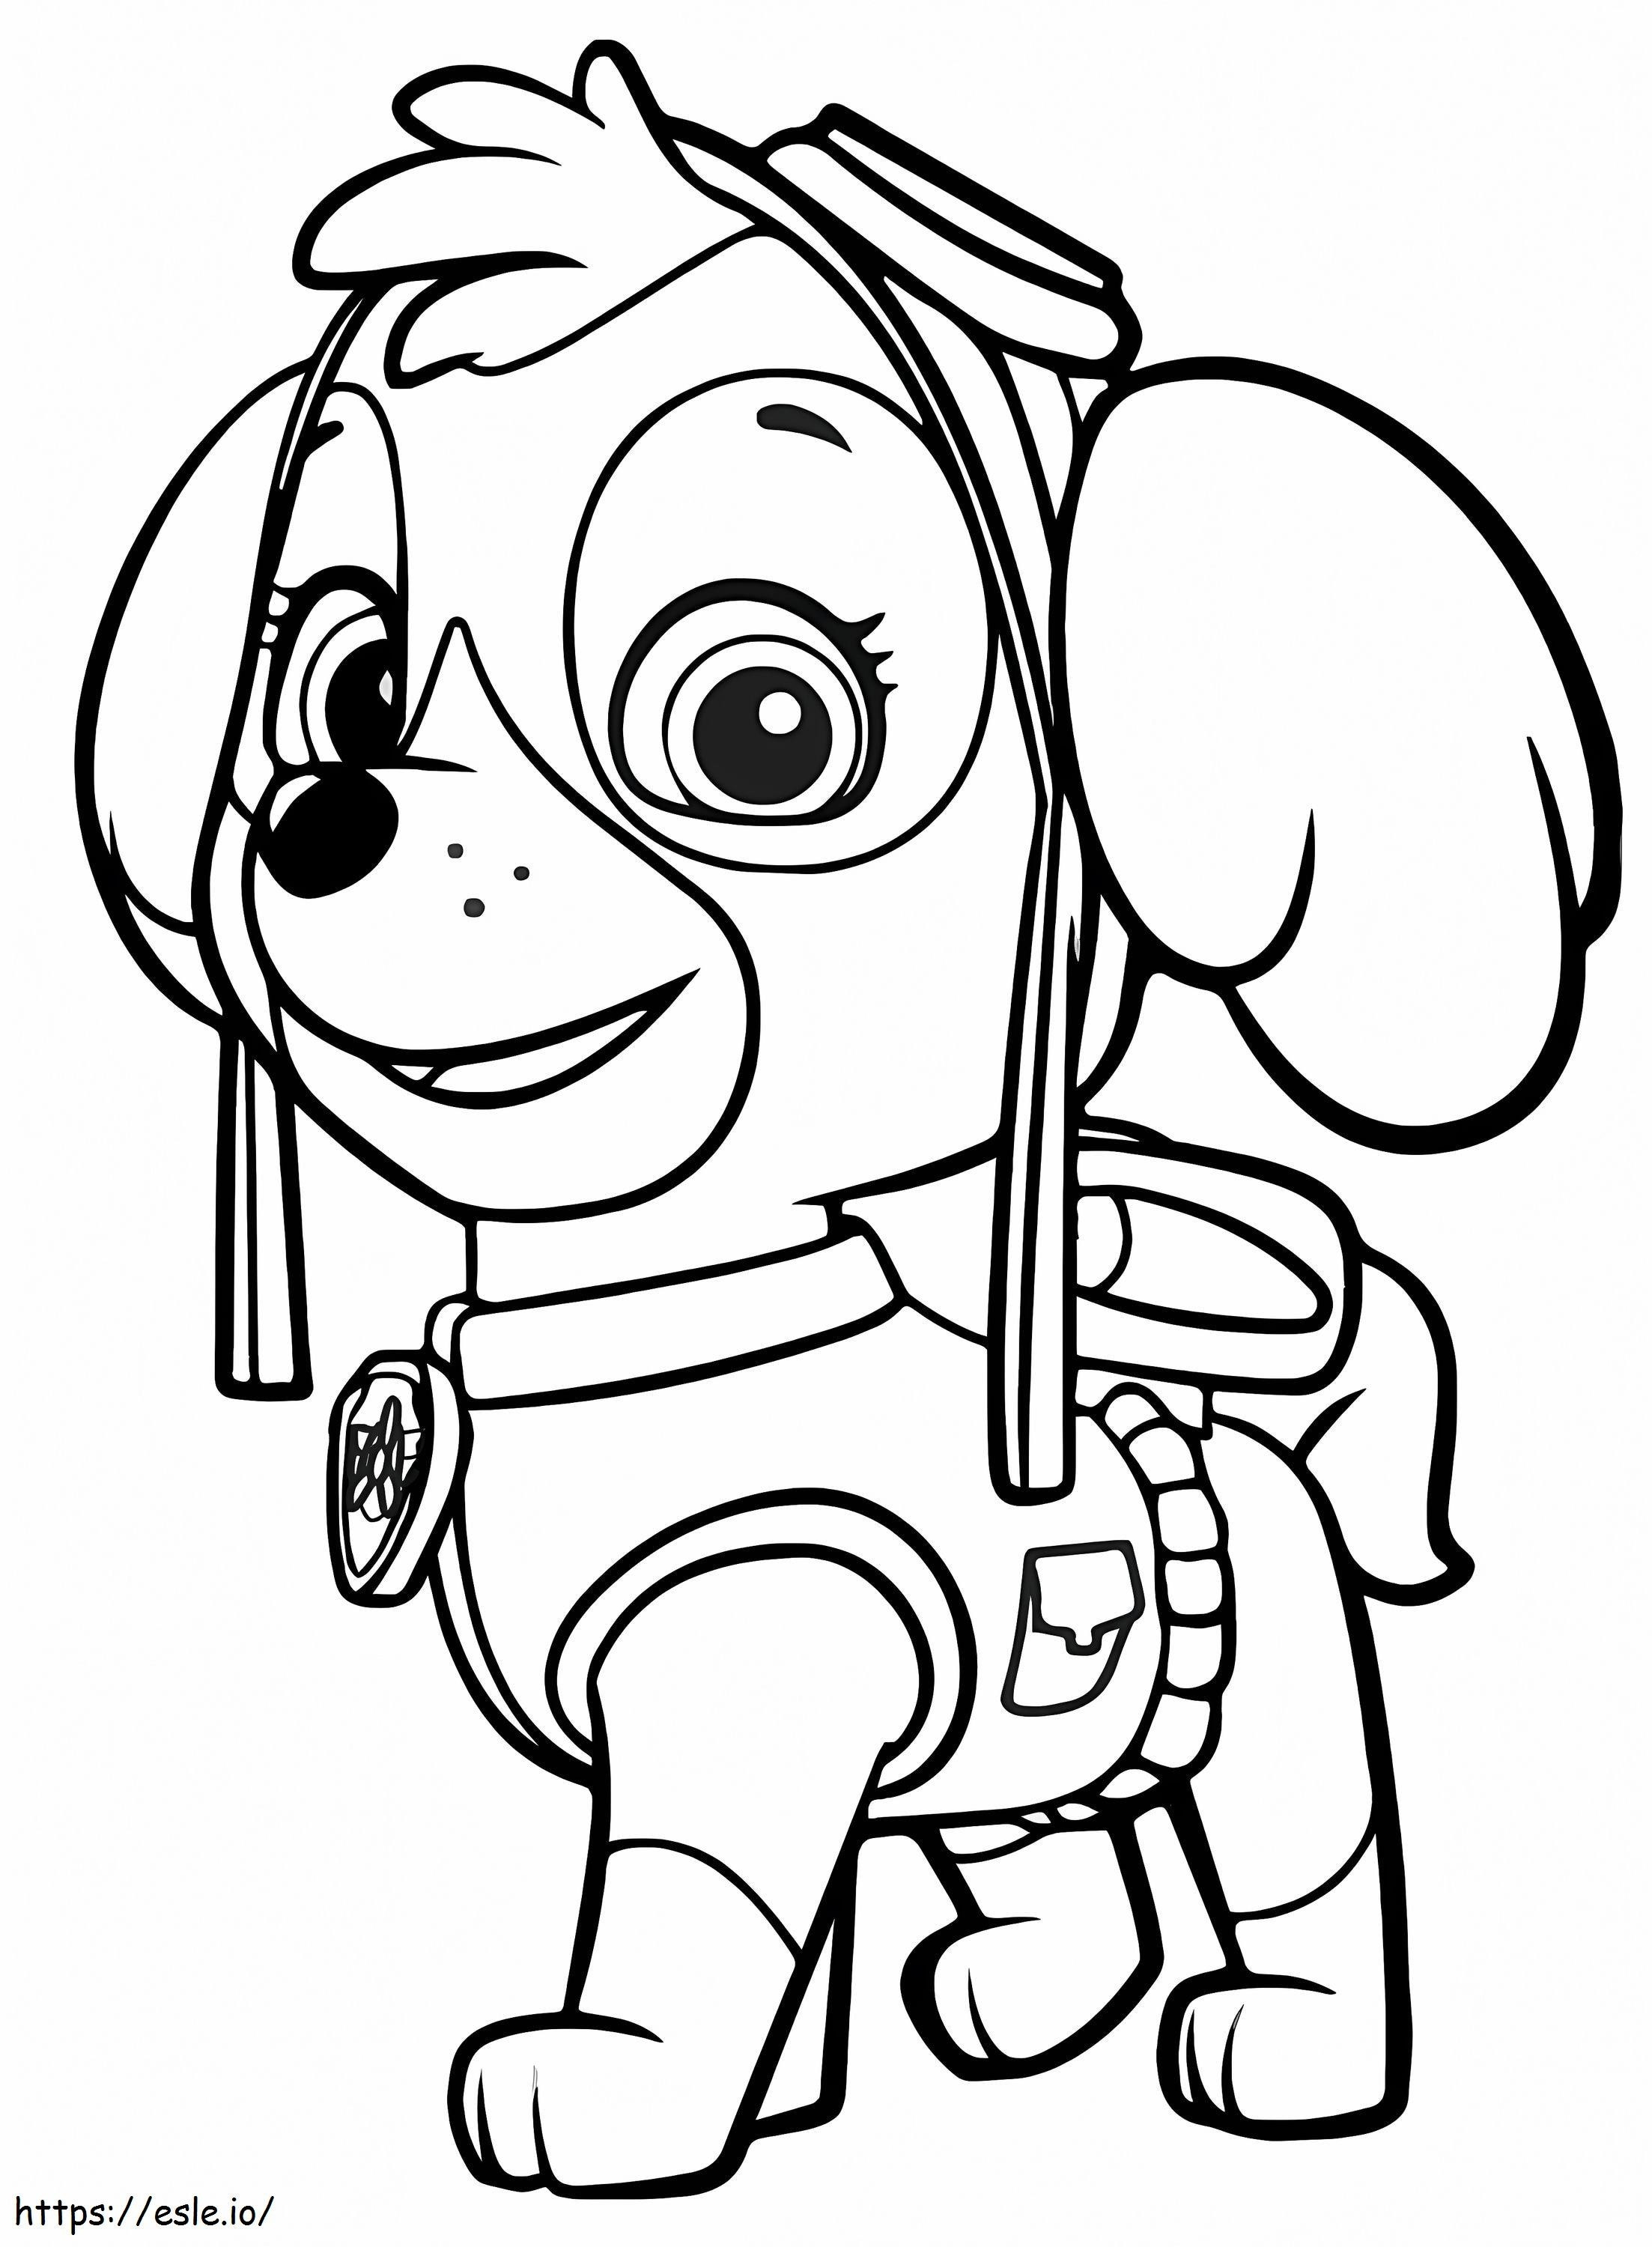 Skye From Paw Patrol 5 coloring page